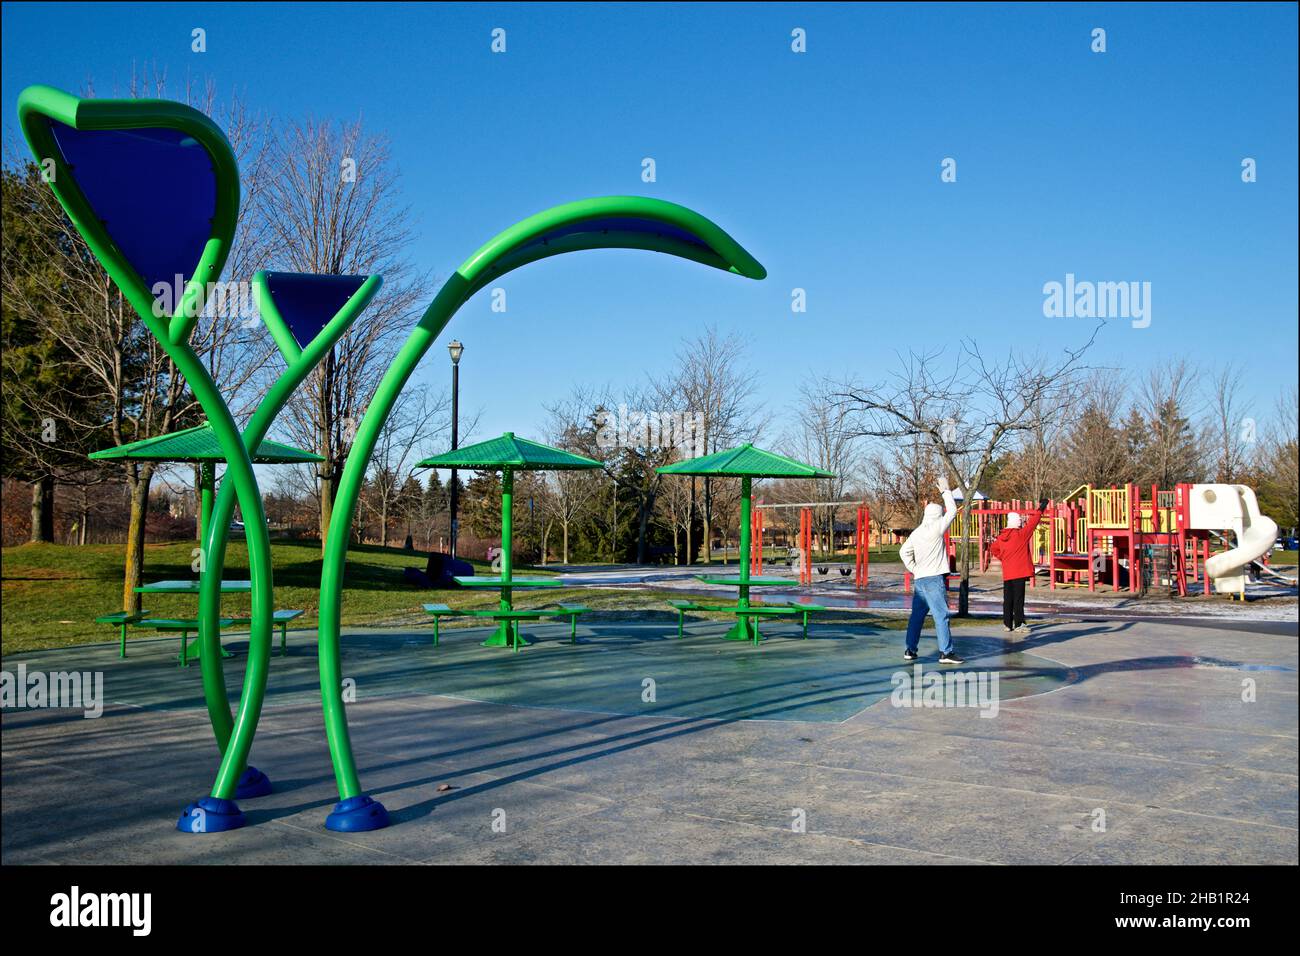 Morning relaxation exercise in the playground with slide at the public park Stock Photo